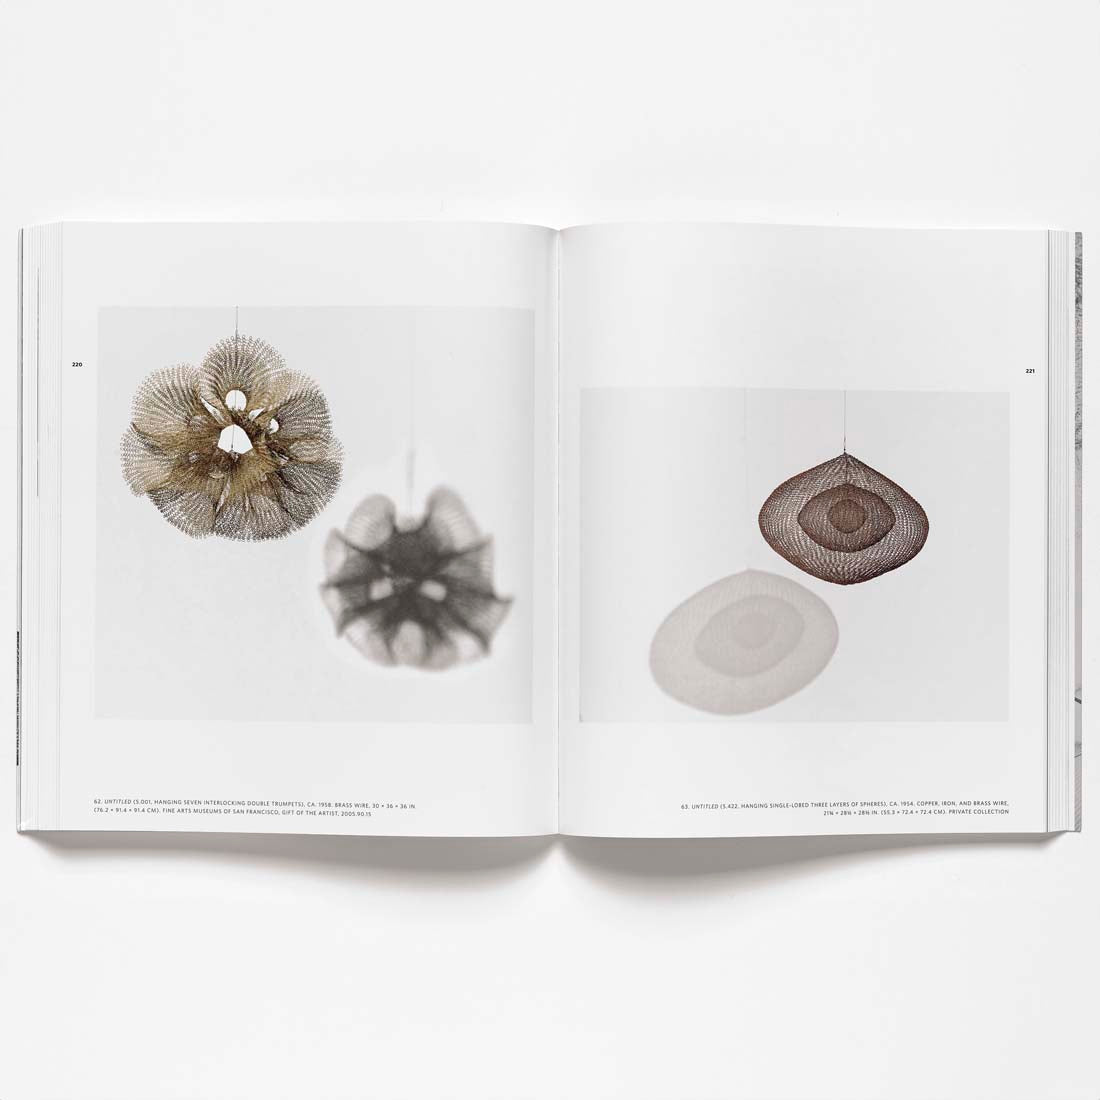 The Sculptures of Ruth Asawa: Contours in the Air Revised Edition